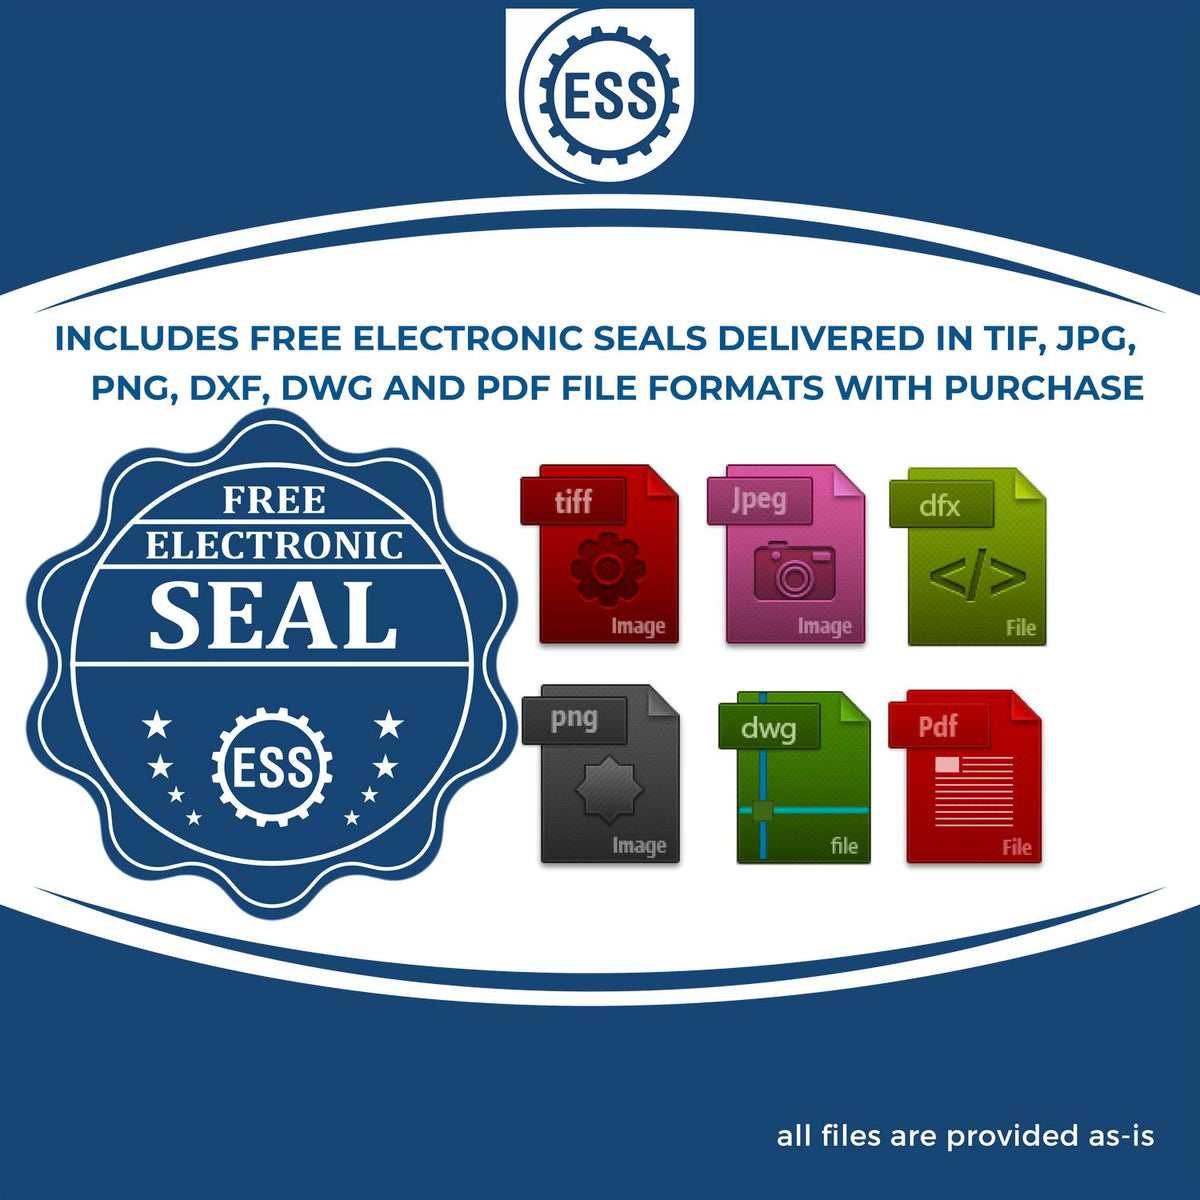 An infographic for the free electronic seal for the Slim Pre-Inked District of Columbia Landscape Architect Seal Stamp illustrating the different file type icons such as DXF, DWG, TIF, JPG and PNG.